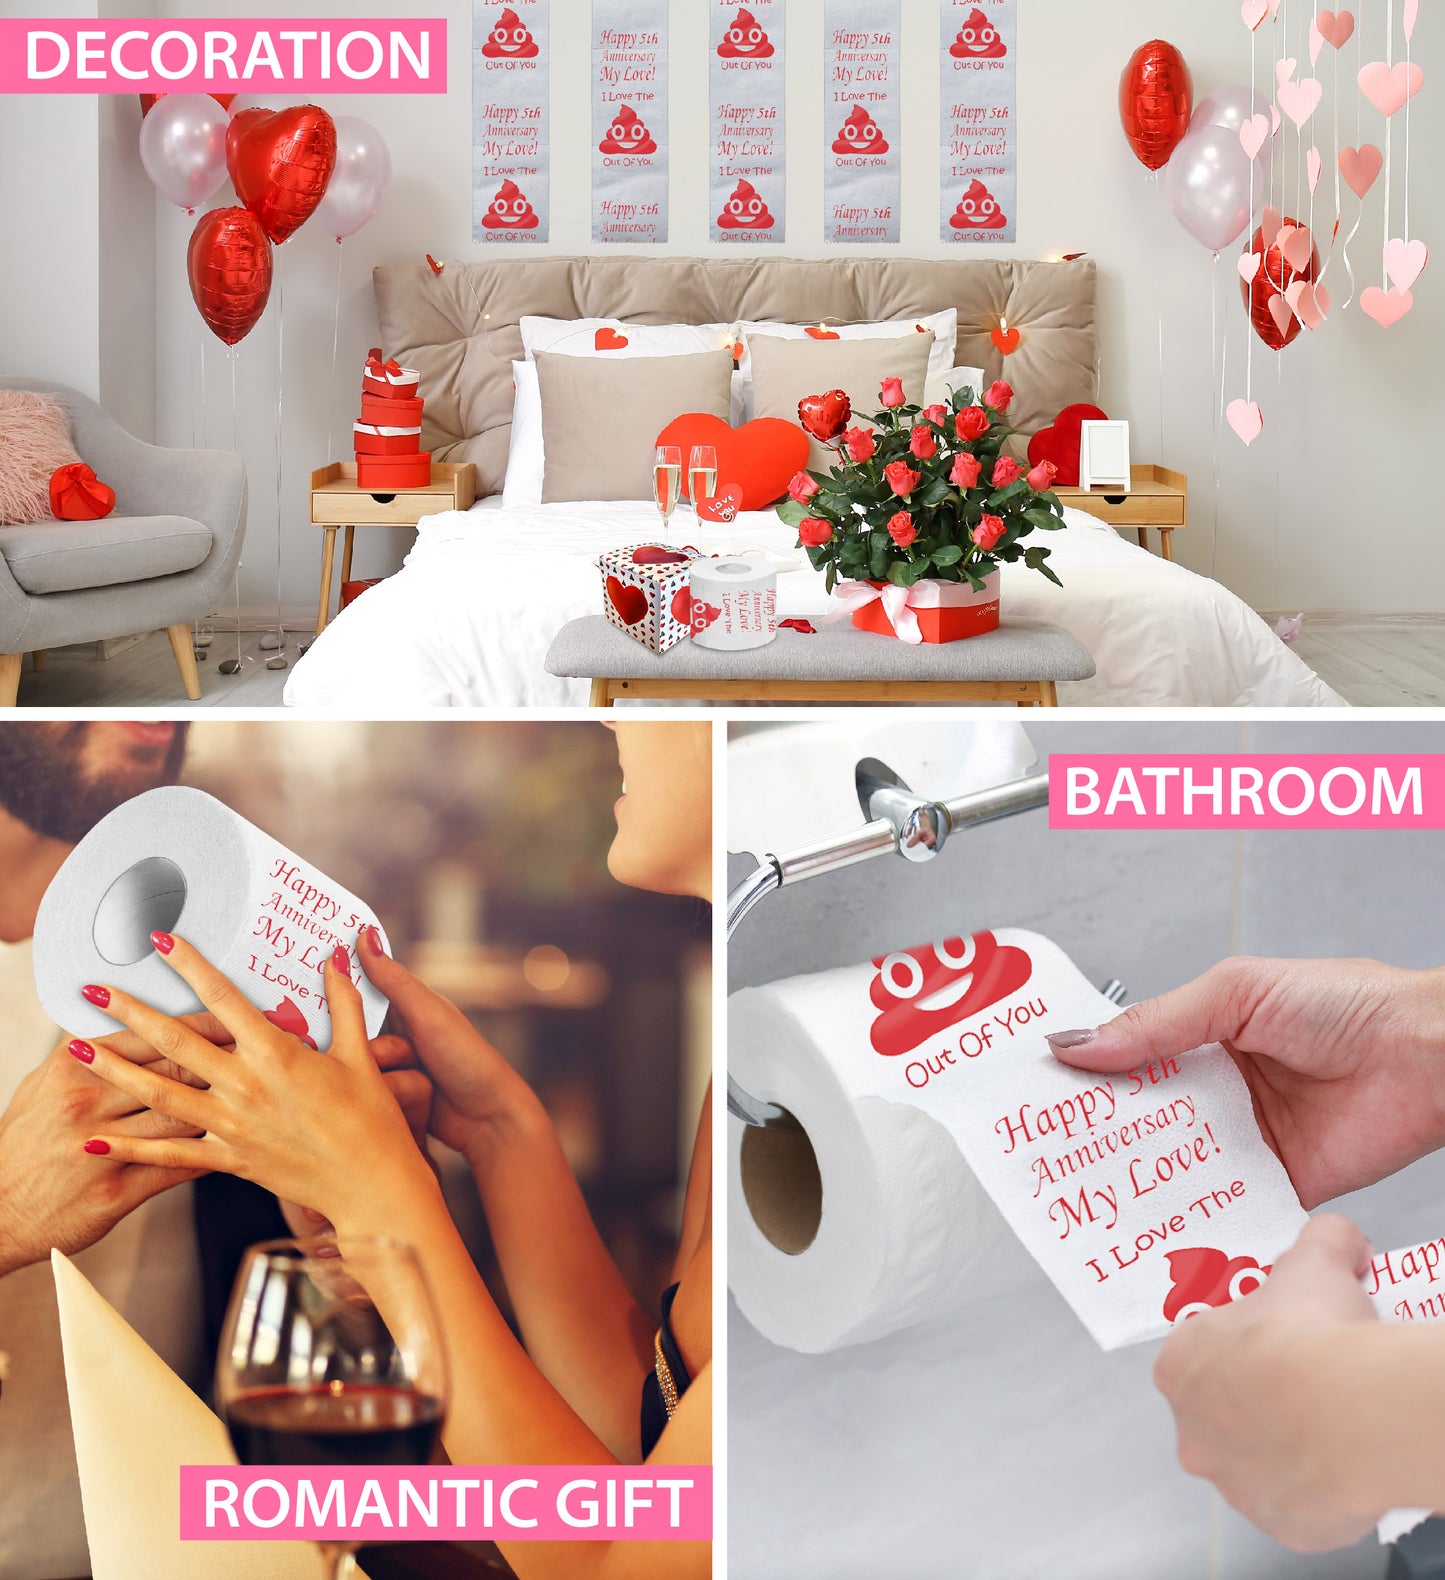 Printed TP Happy Fifth Anniversary Printed Toilet Paper Prank – 500 Sheets